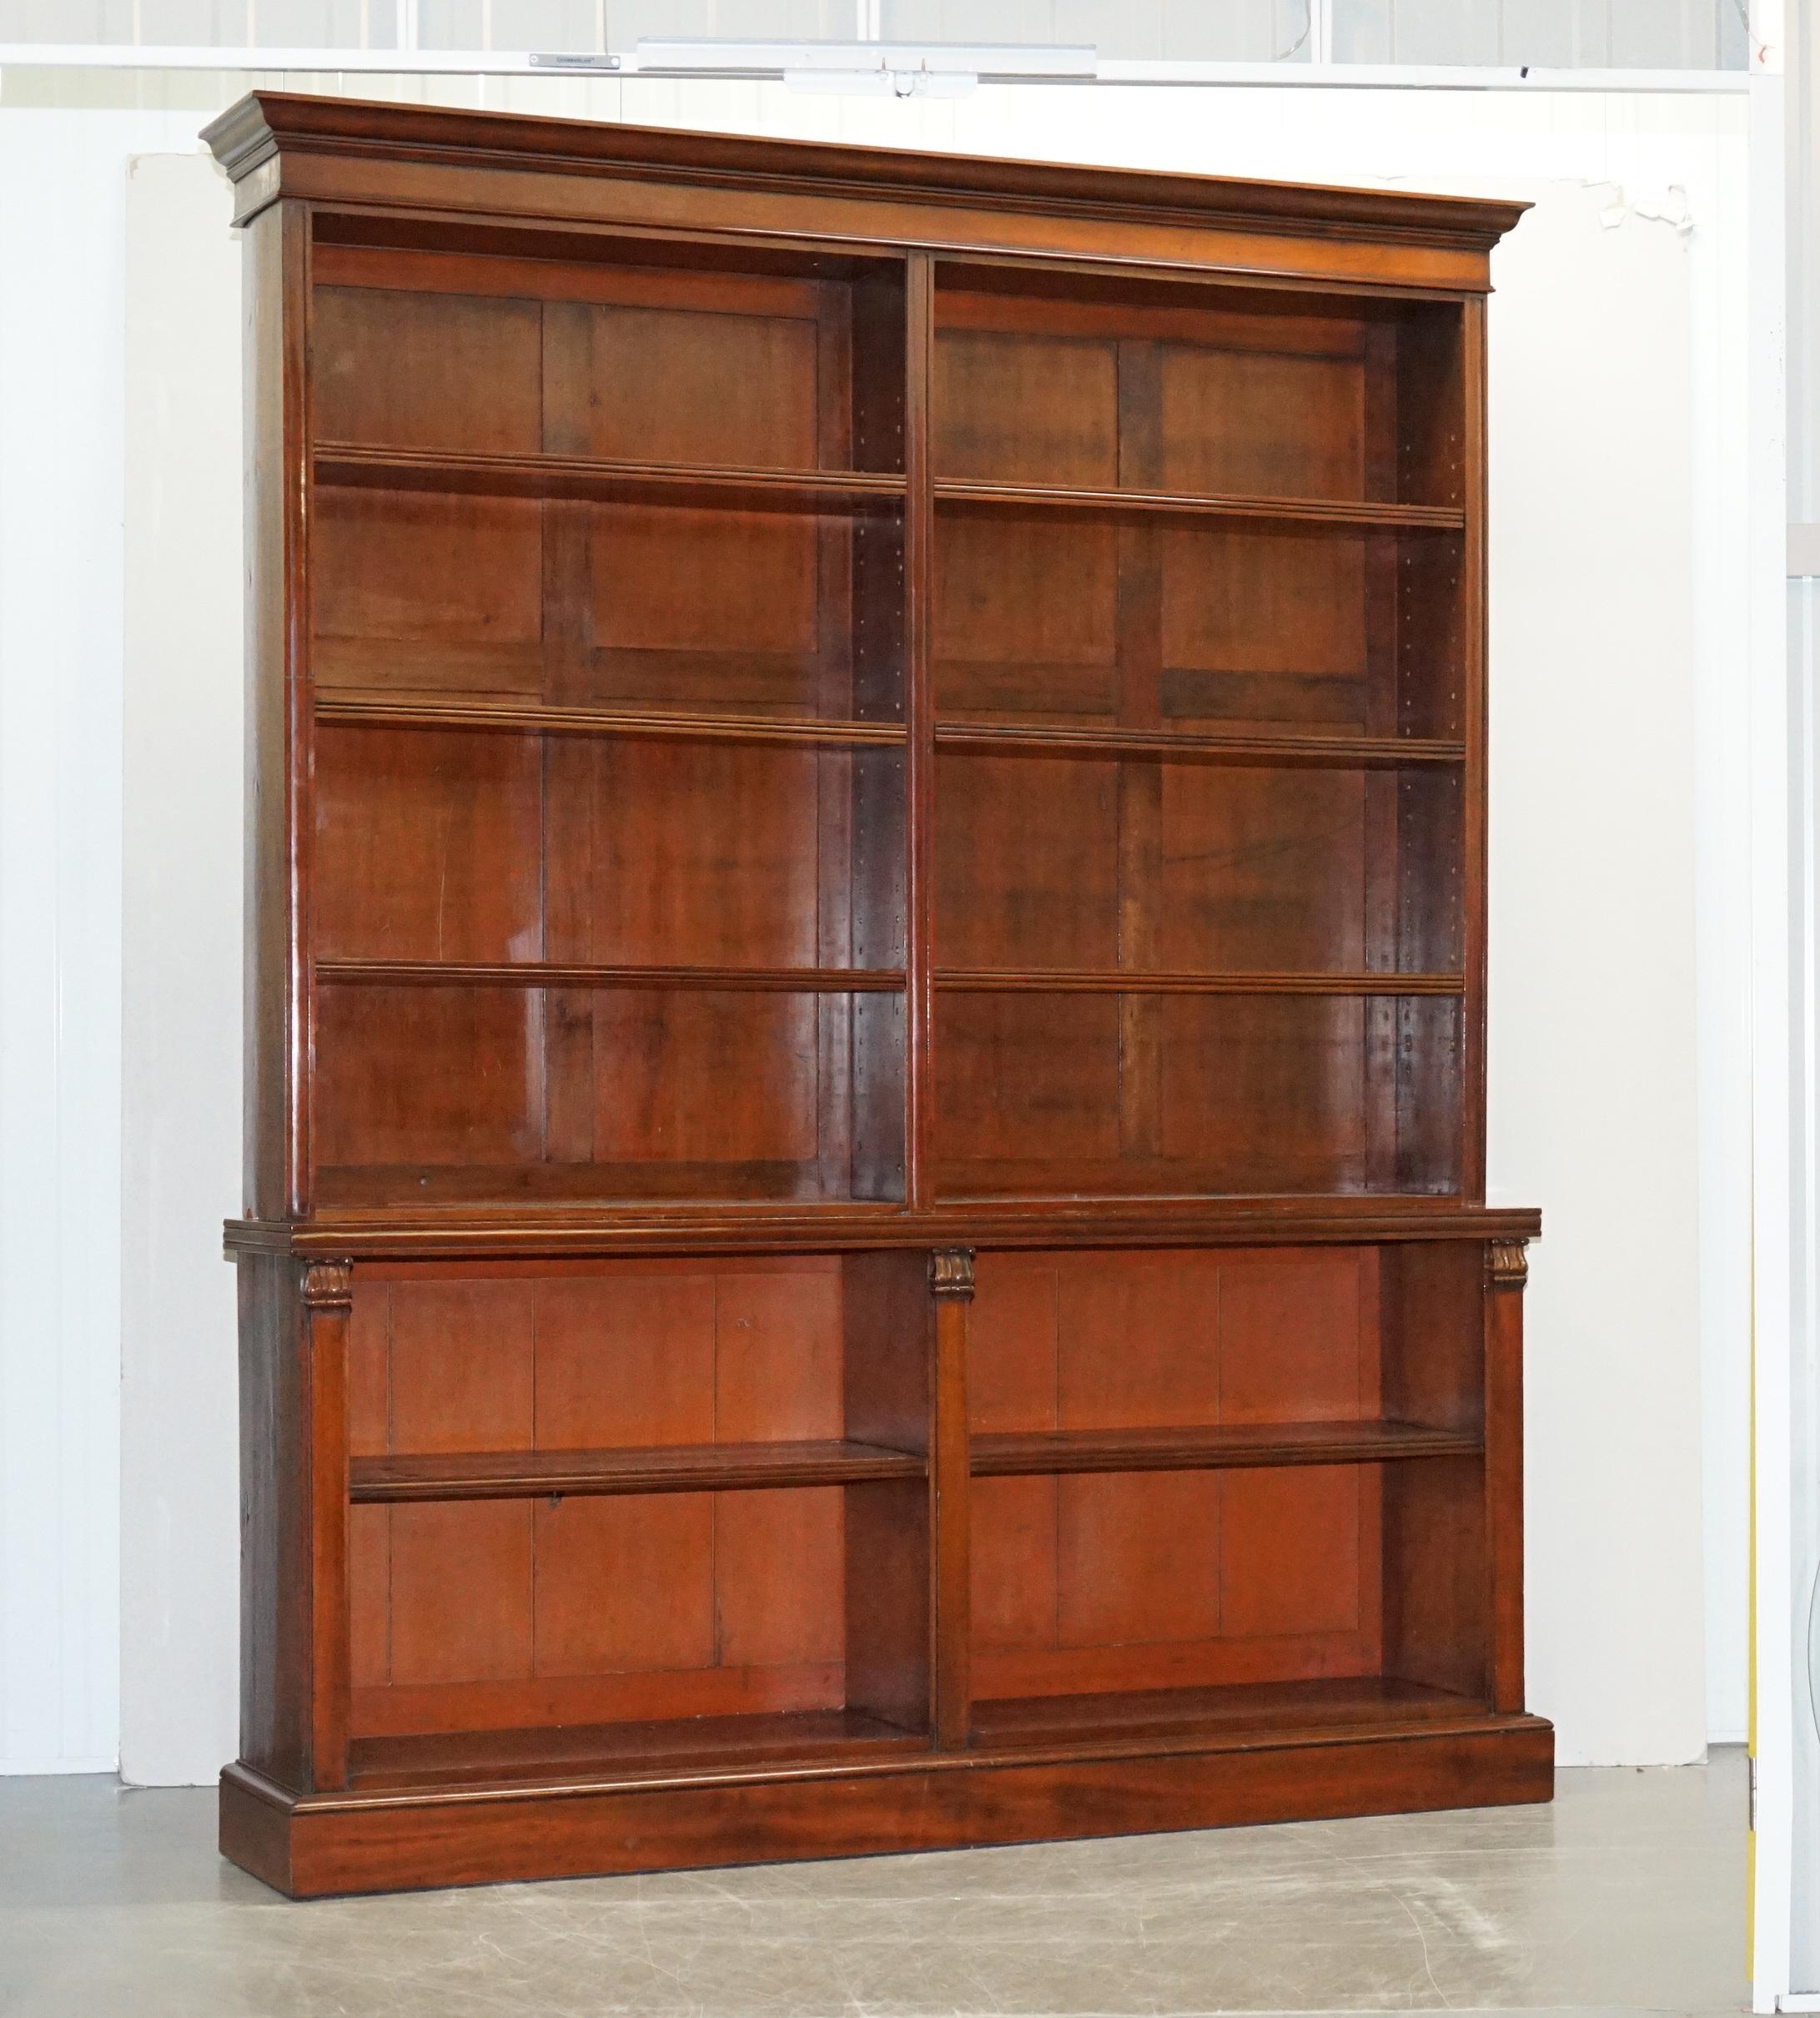 We are delighted to offer for sale this stunning pair of mid Victorian solid mahogany Library bookcases circa 1860

Its very rare to find a pair especially in this condition, they are very fine, well made and sit extremely well. The timber is